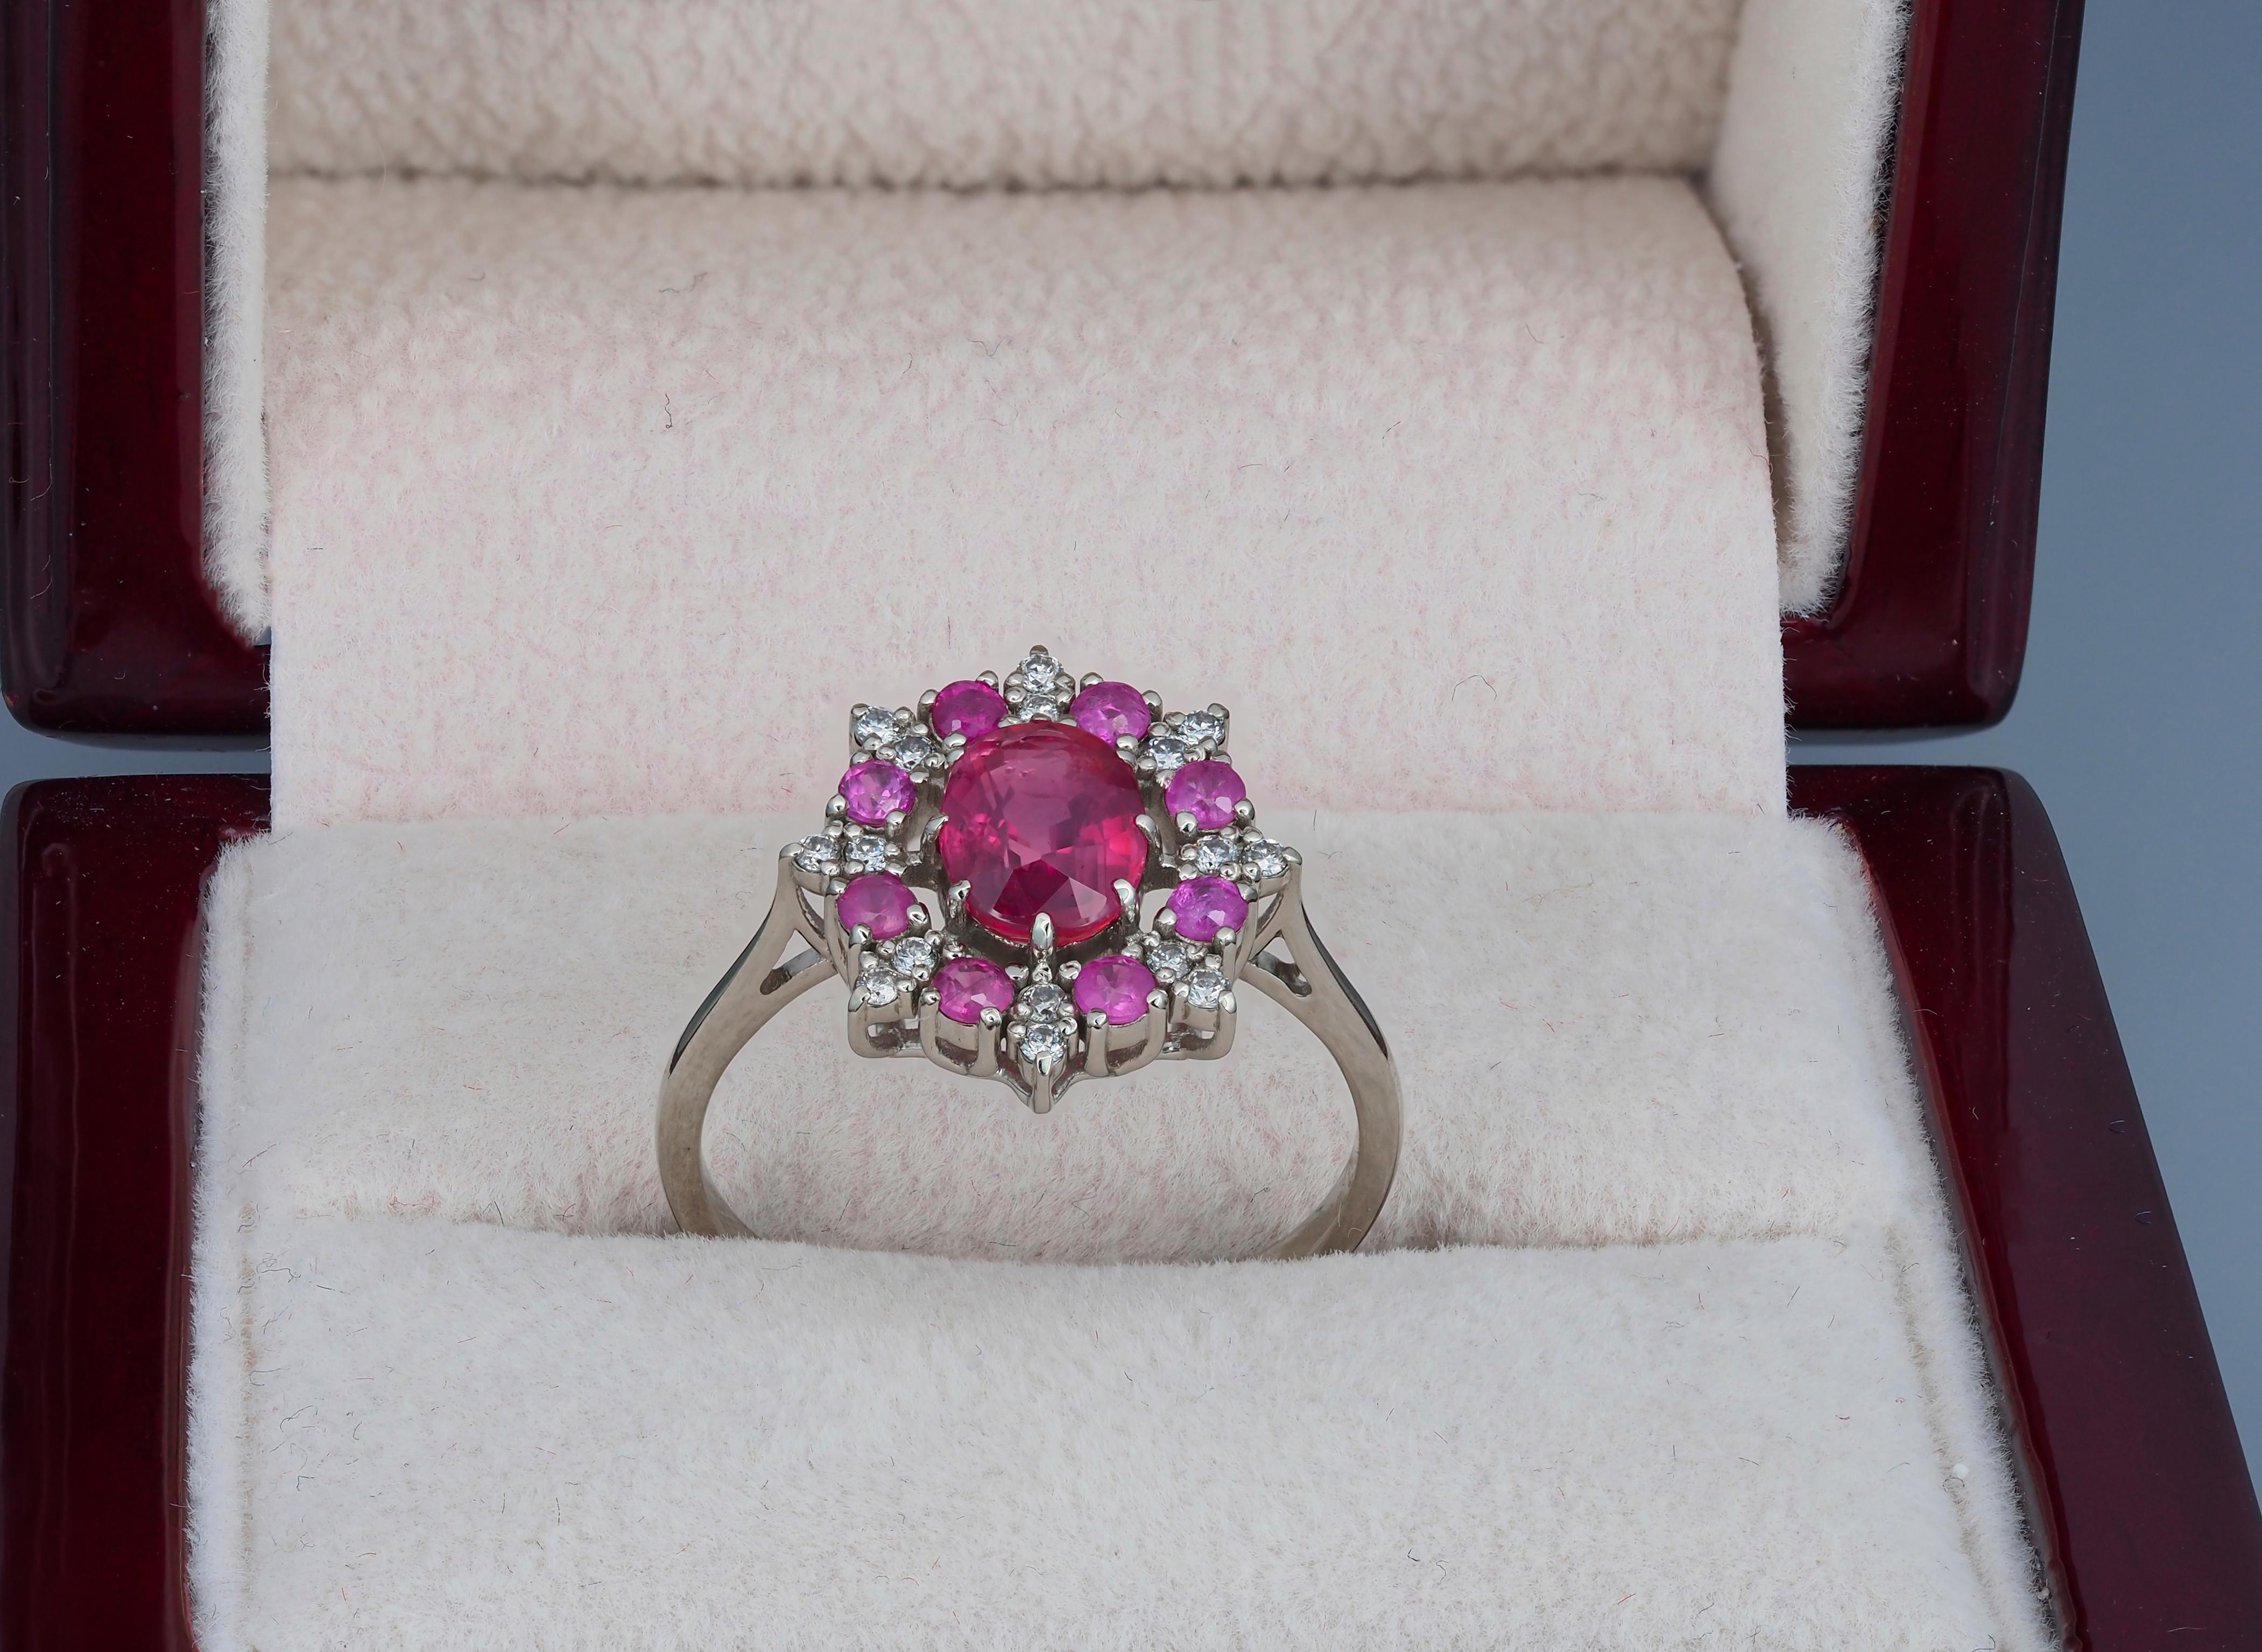 For Sale:  14 karat Gold Ring with Ruby and Diamonds. Snowflake Gold Ring 7